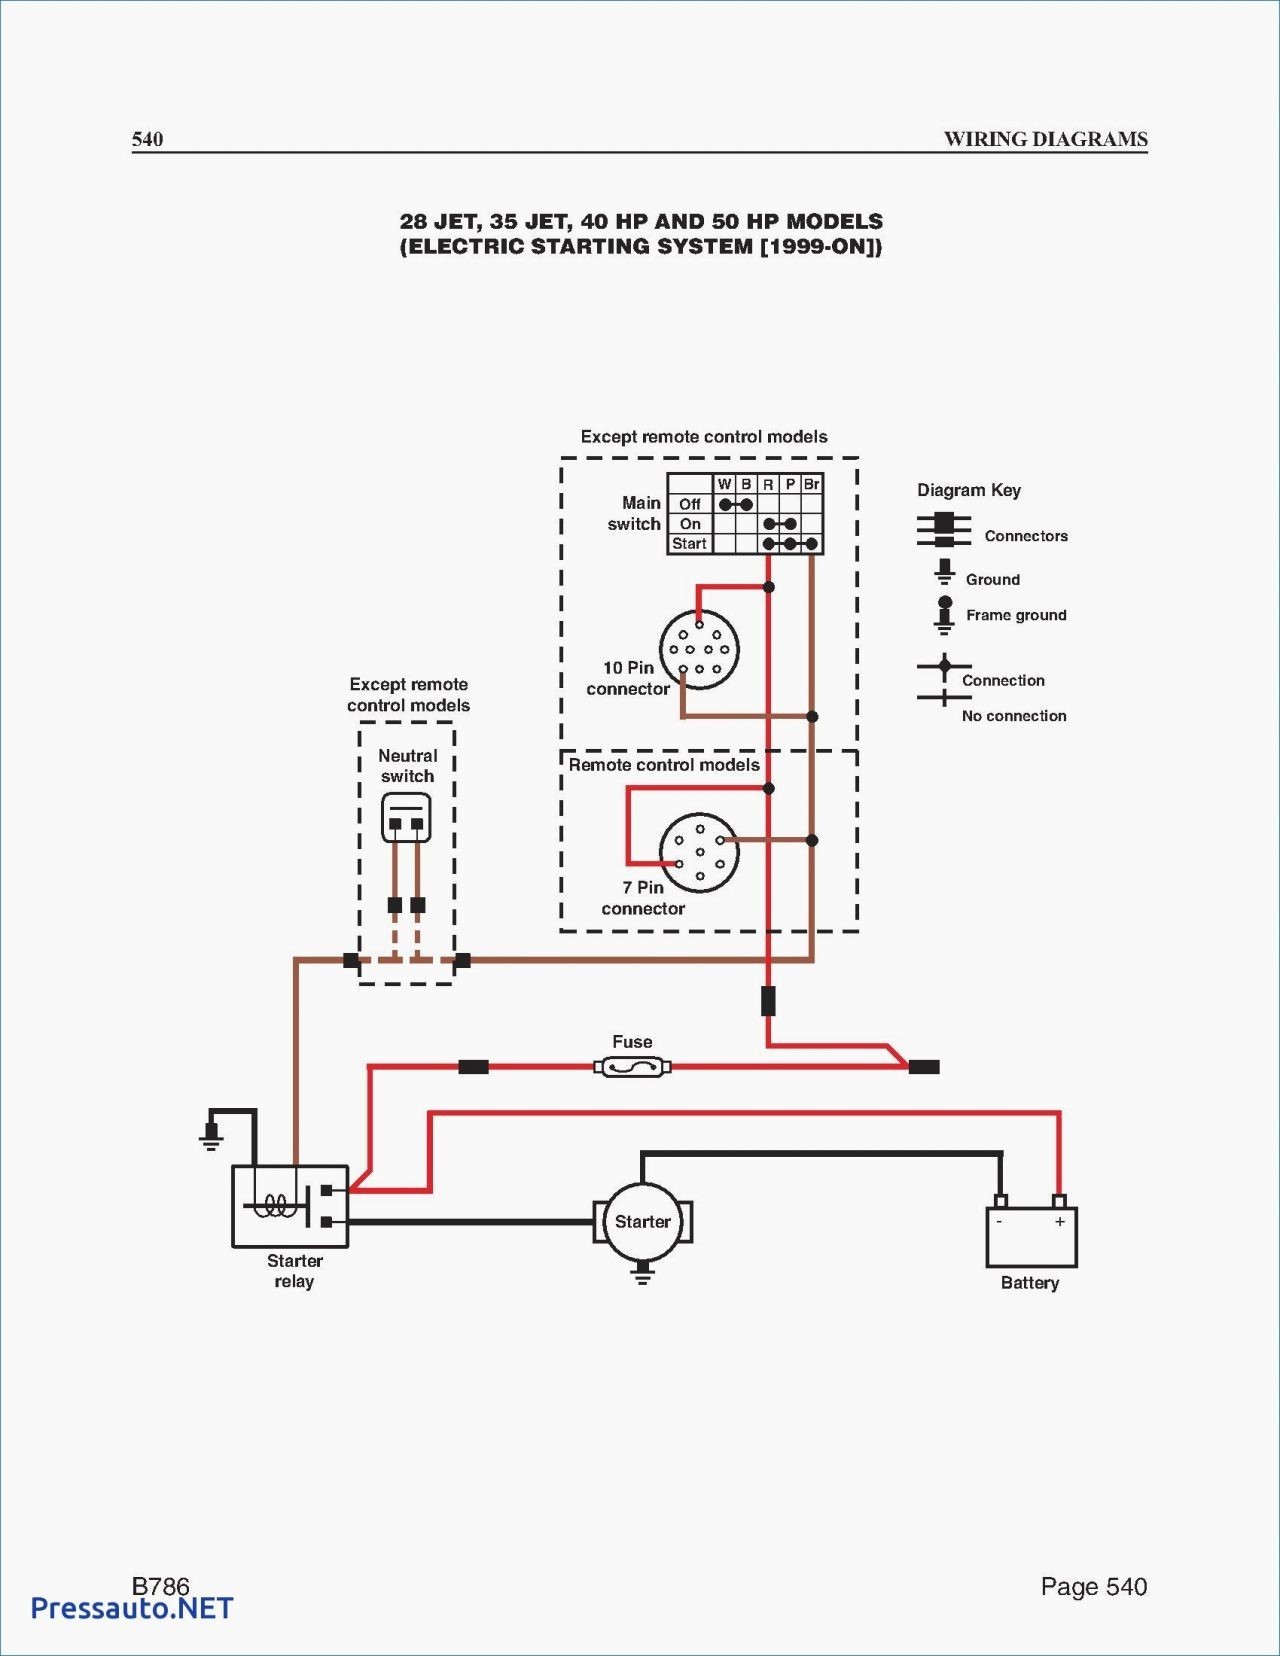 Wiring Diagram 3 Way Switch Pilot Light New Wiring Diagram for Single Pole Switch with Pilot